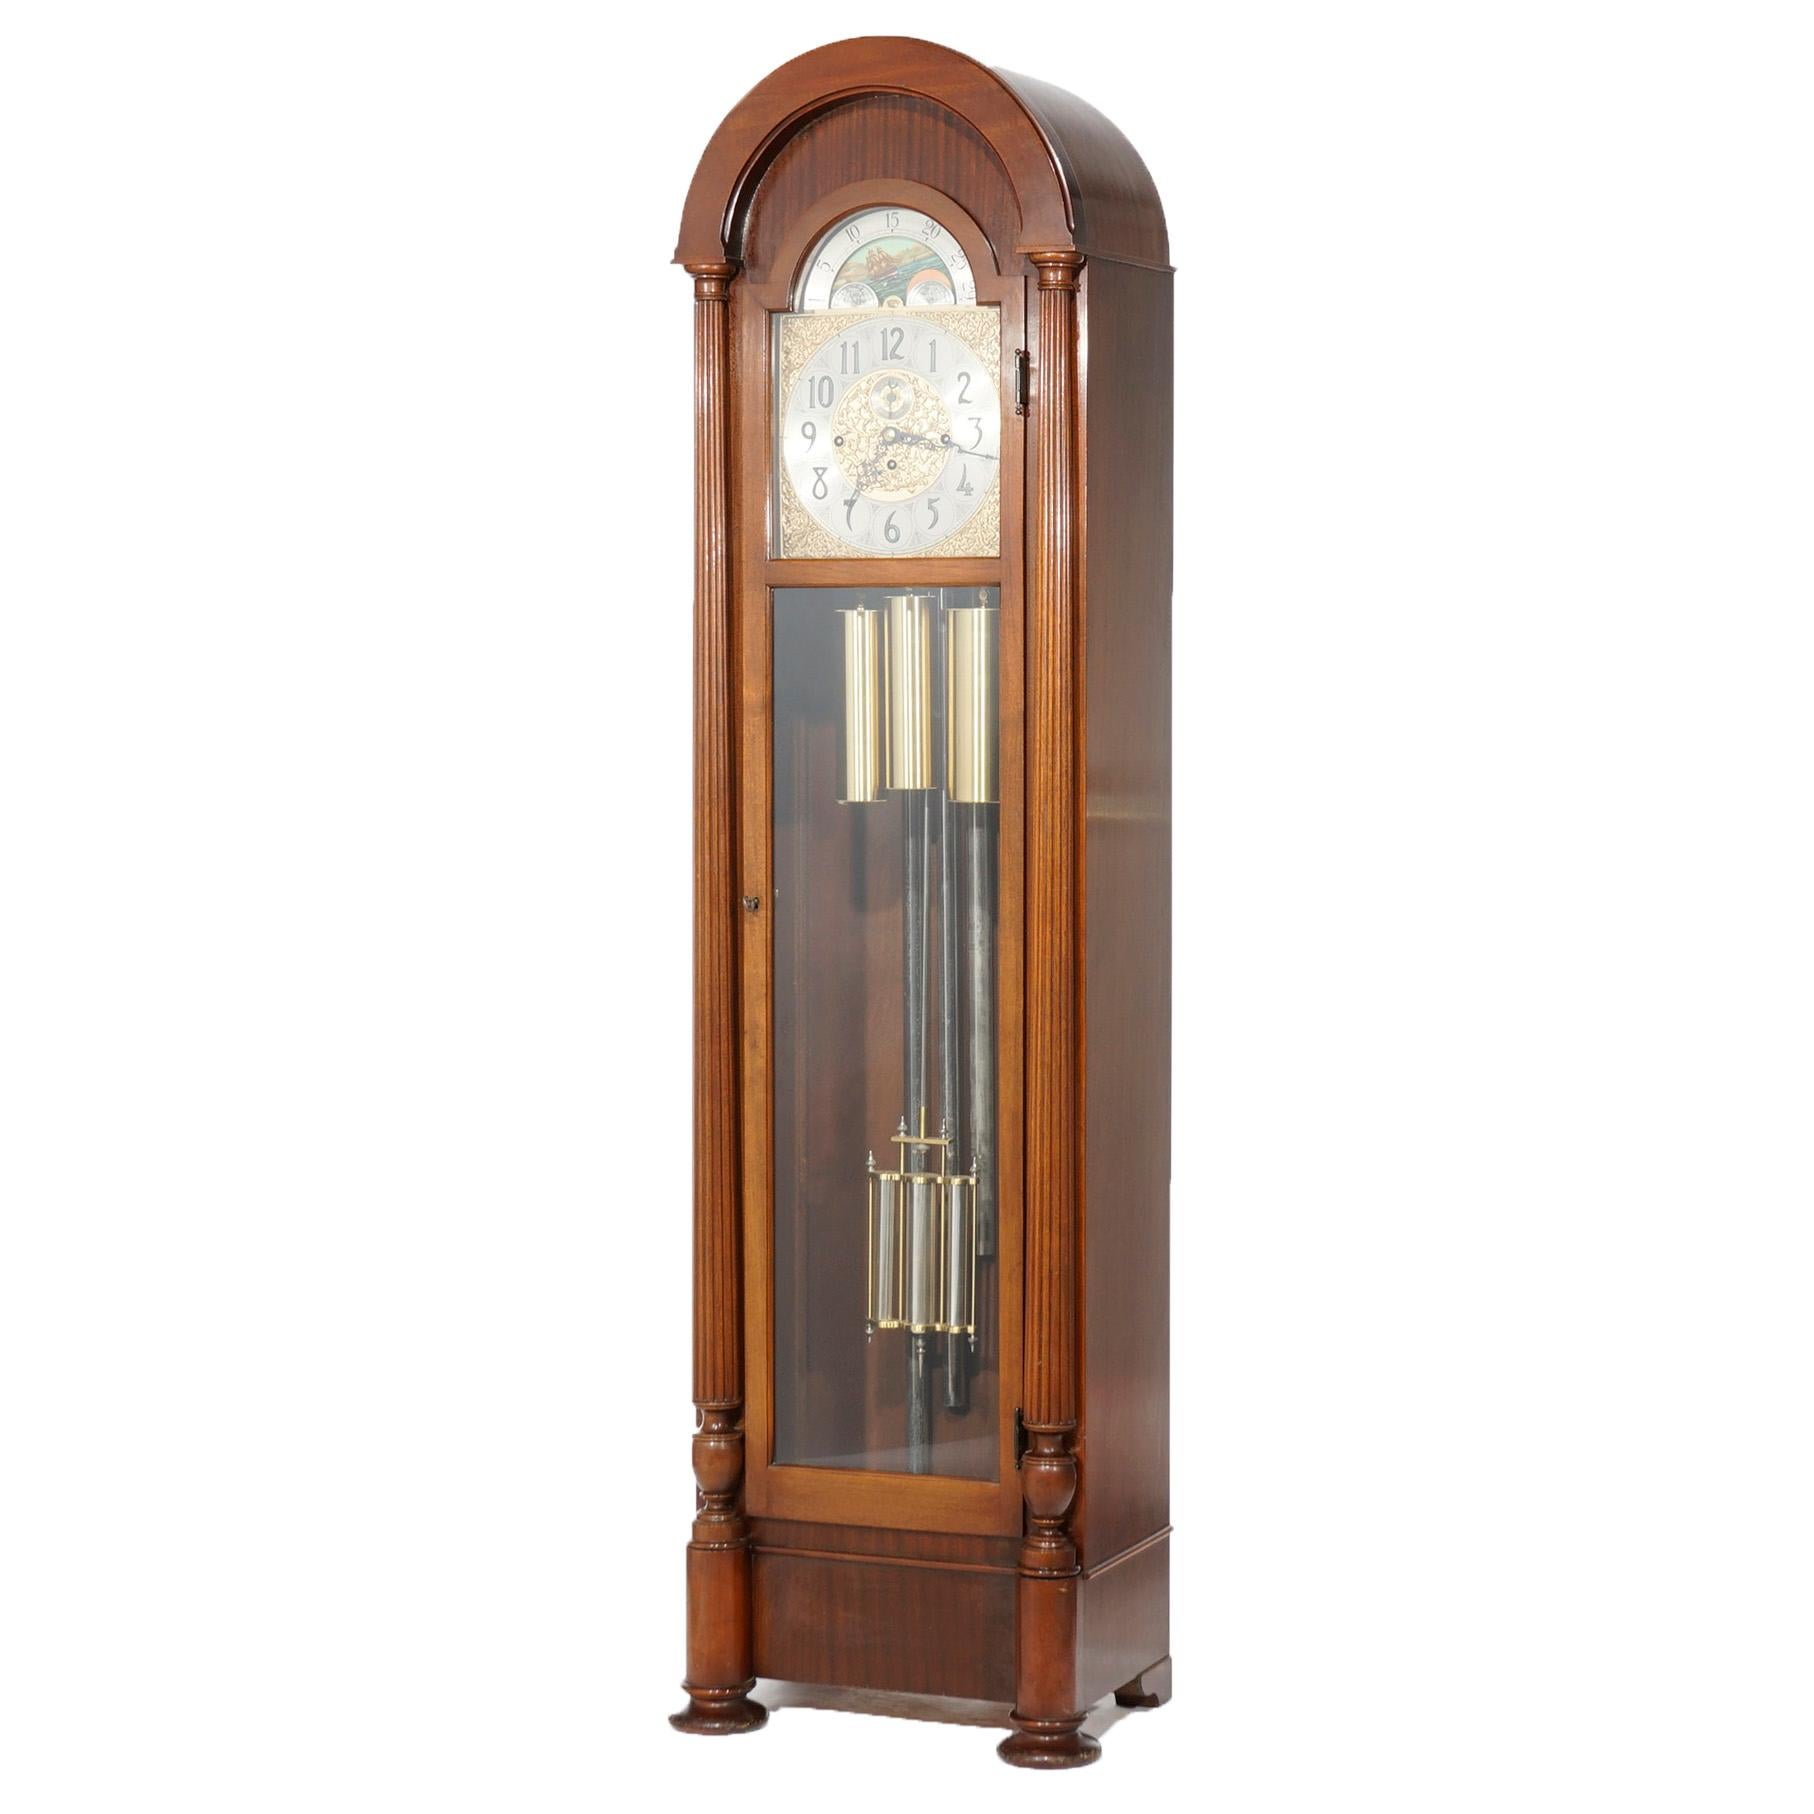 An antique tall case clock by Herschede offers mahogany case in arched form with central glass door and flanking columns, 